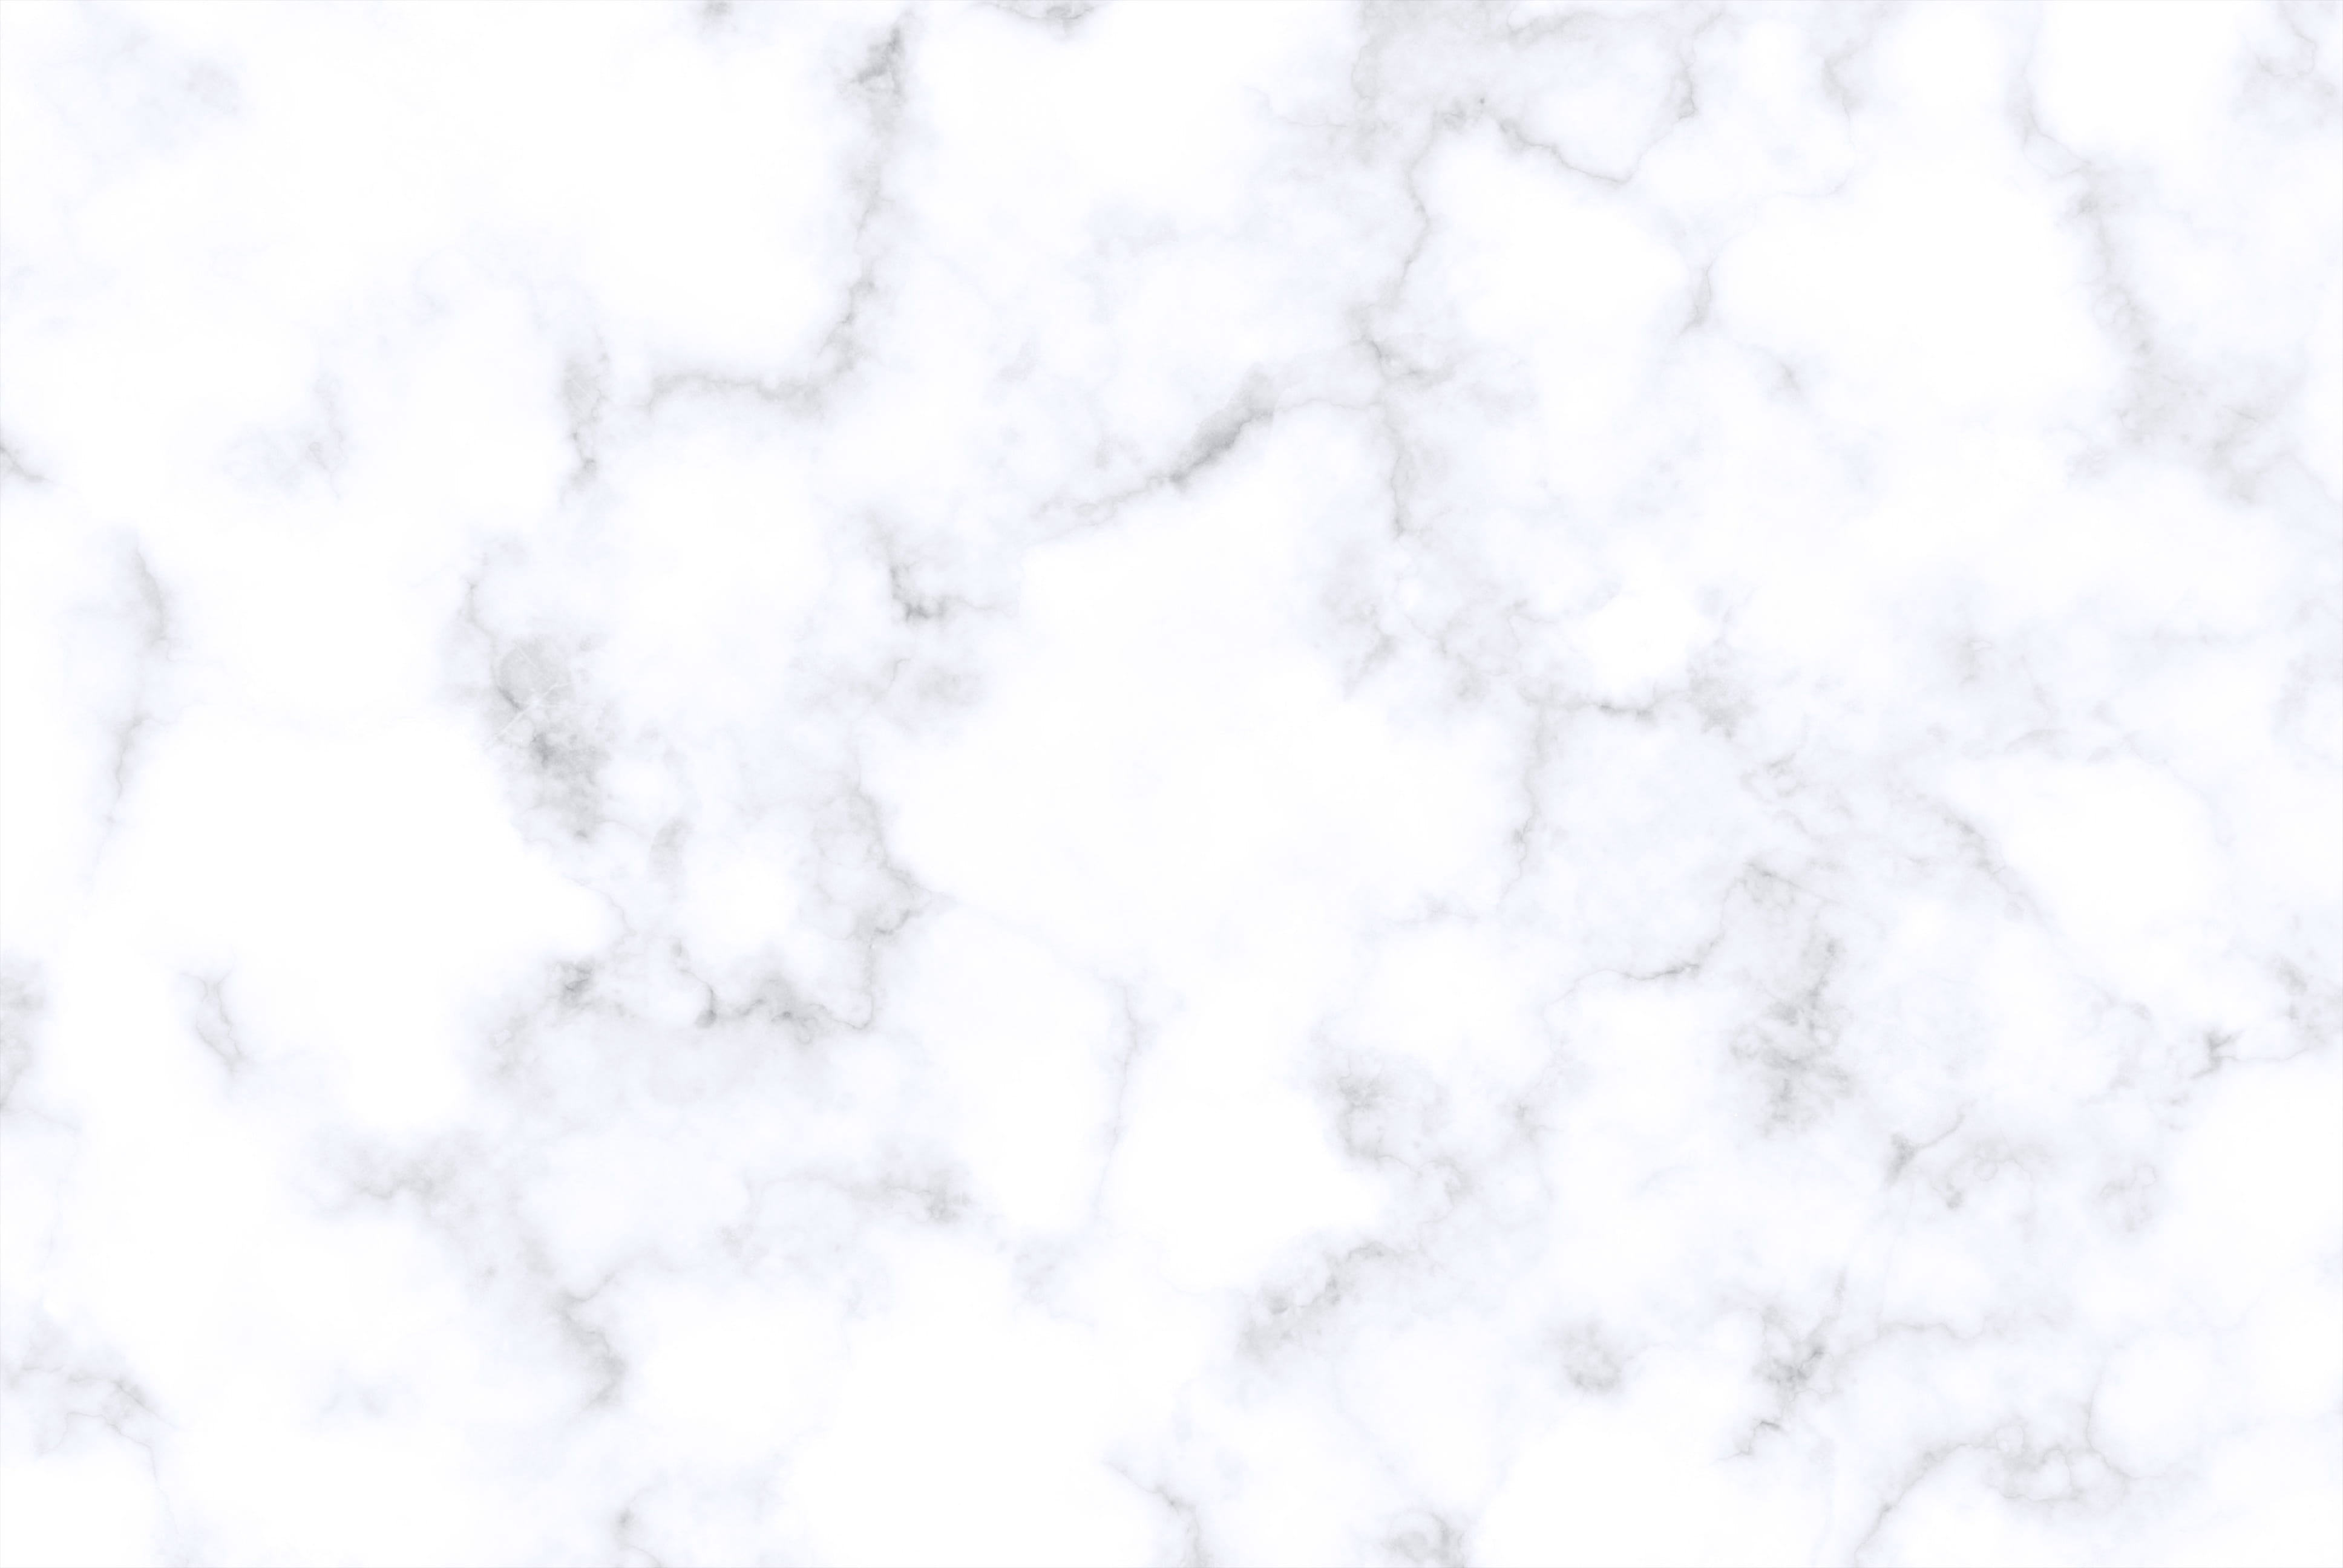 white and gray graphite surface, marble, texture, pattern, surface effect